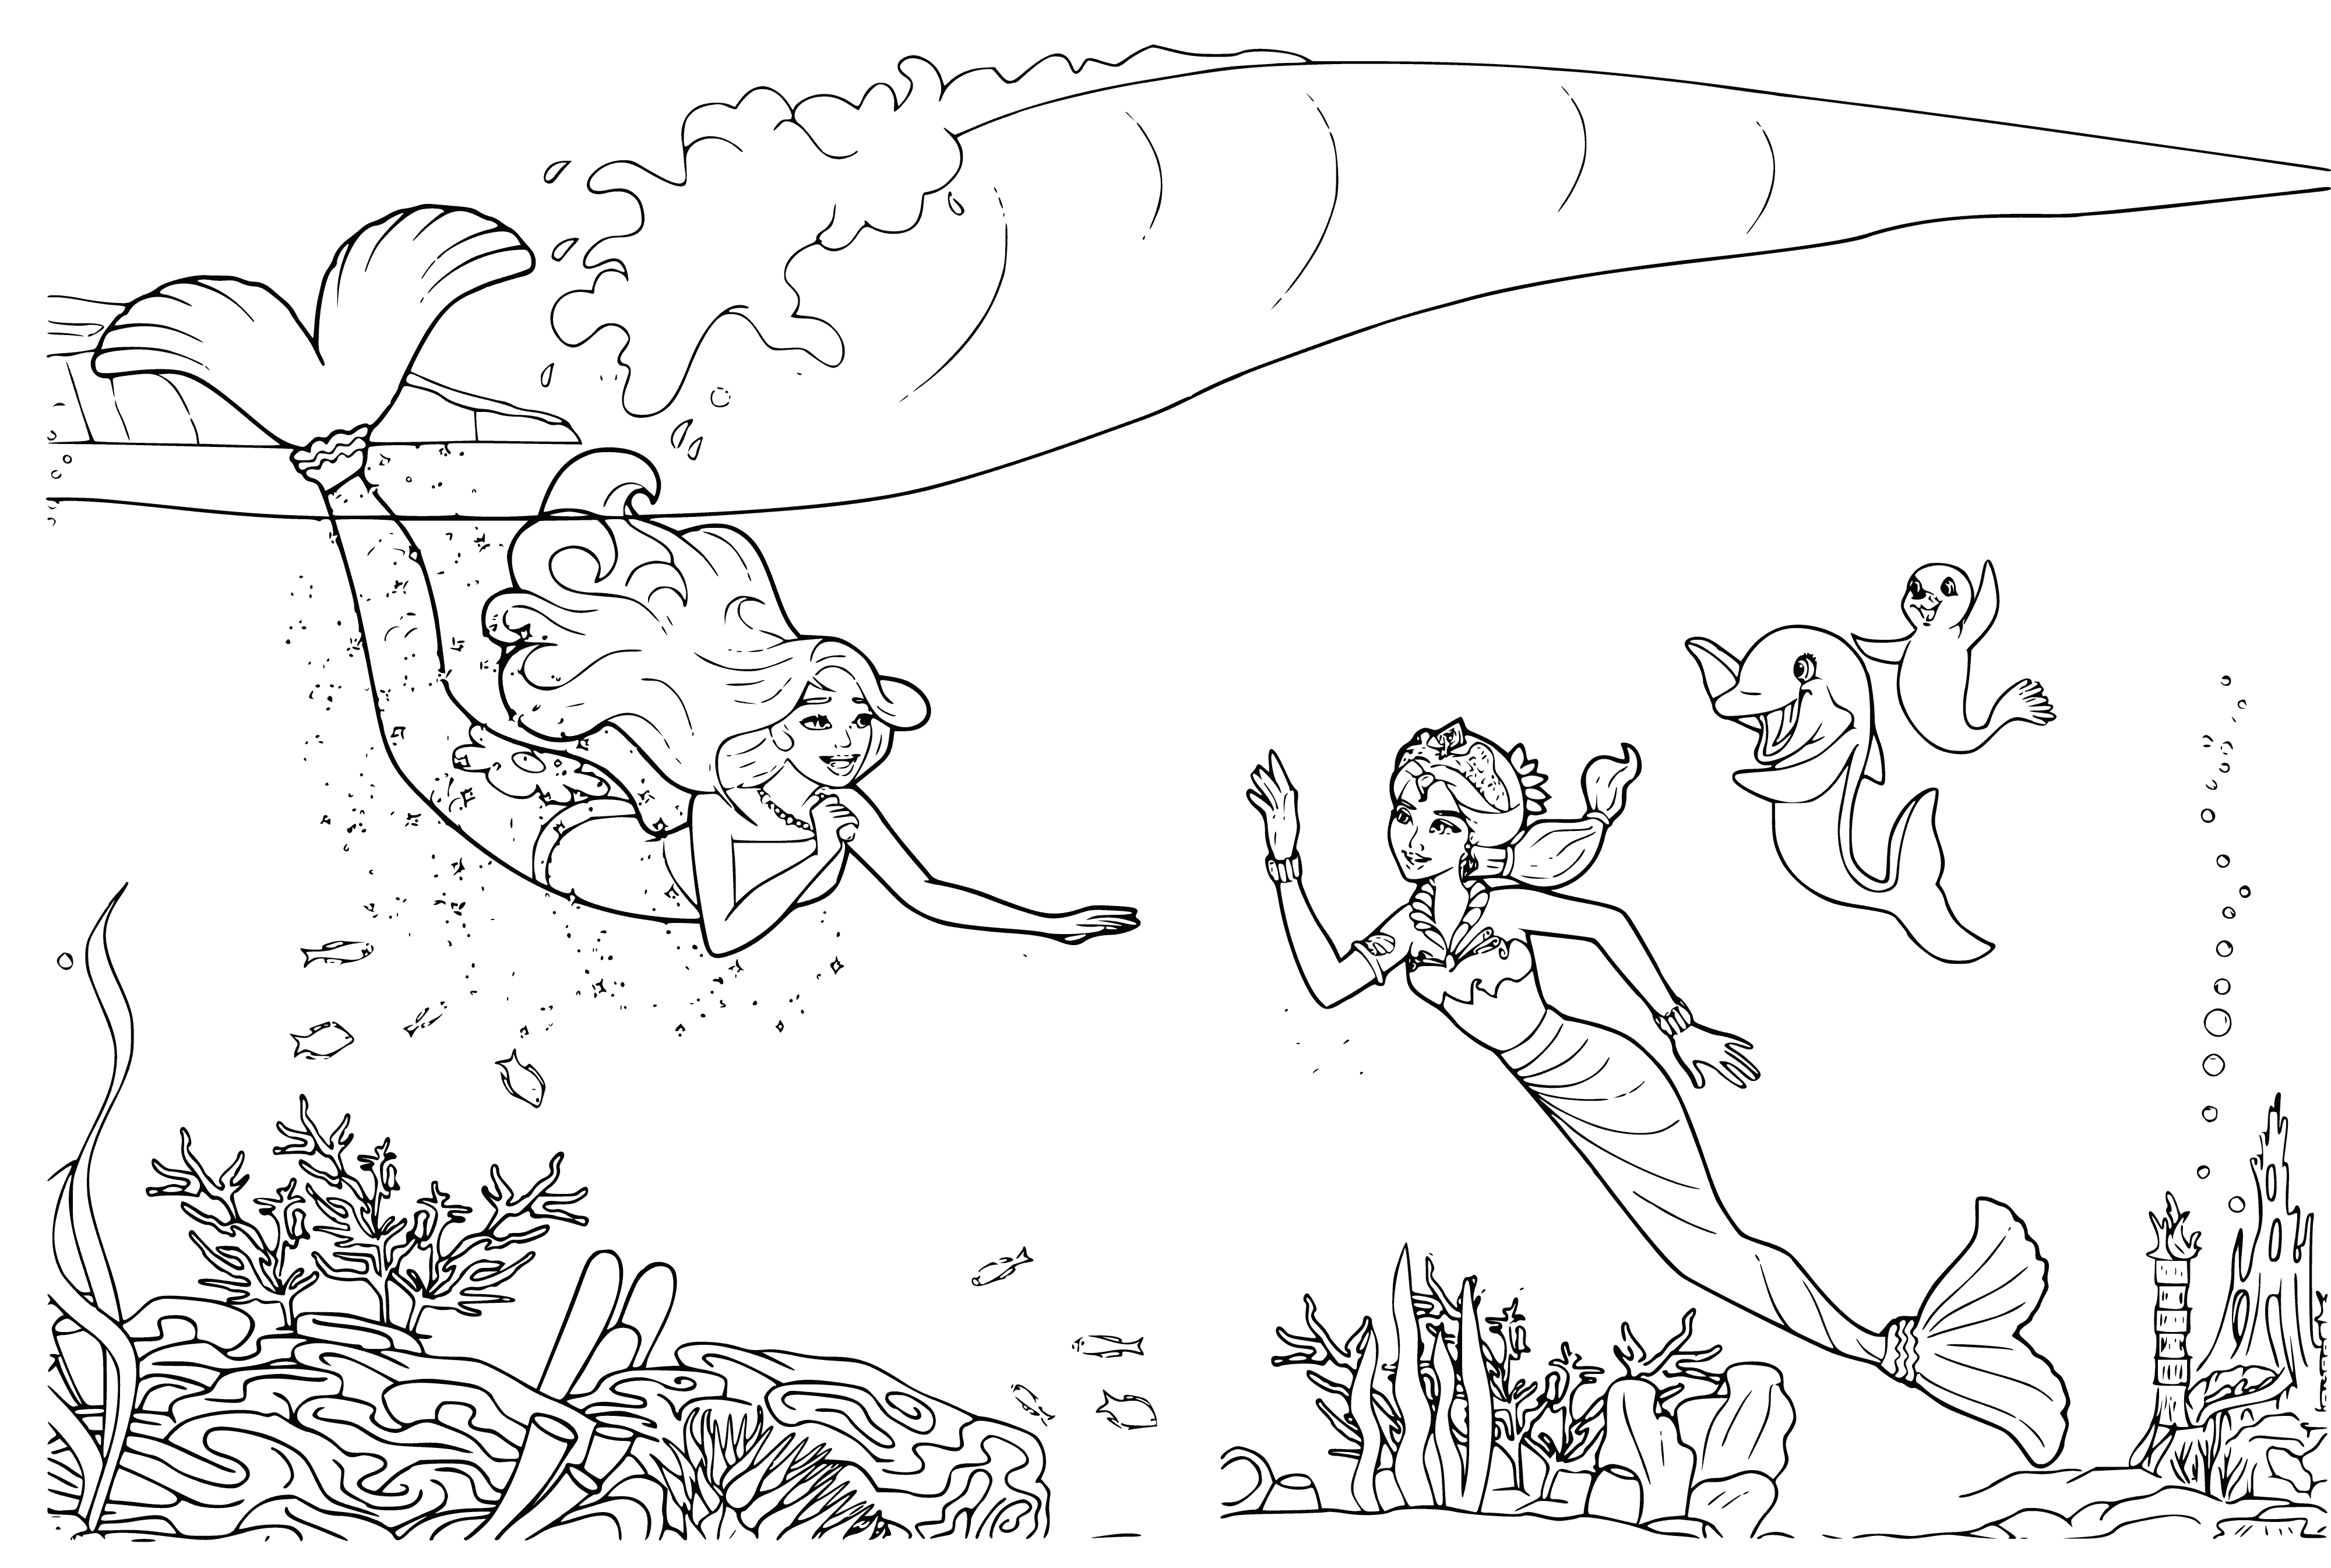 Little Mermaid Adventures coloring page